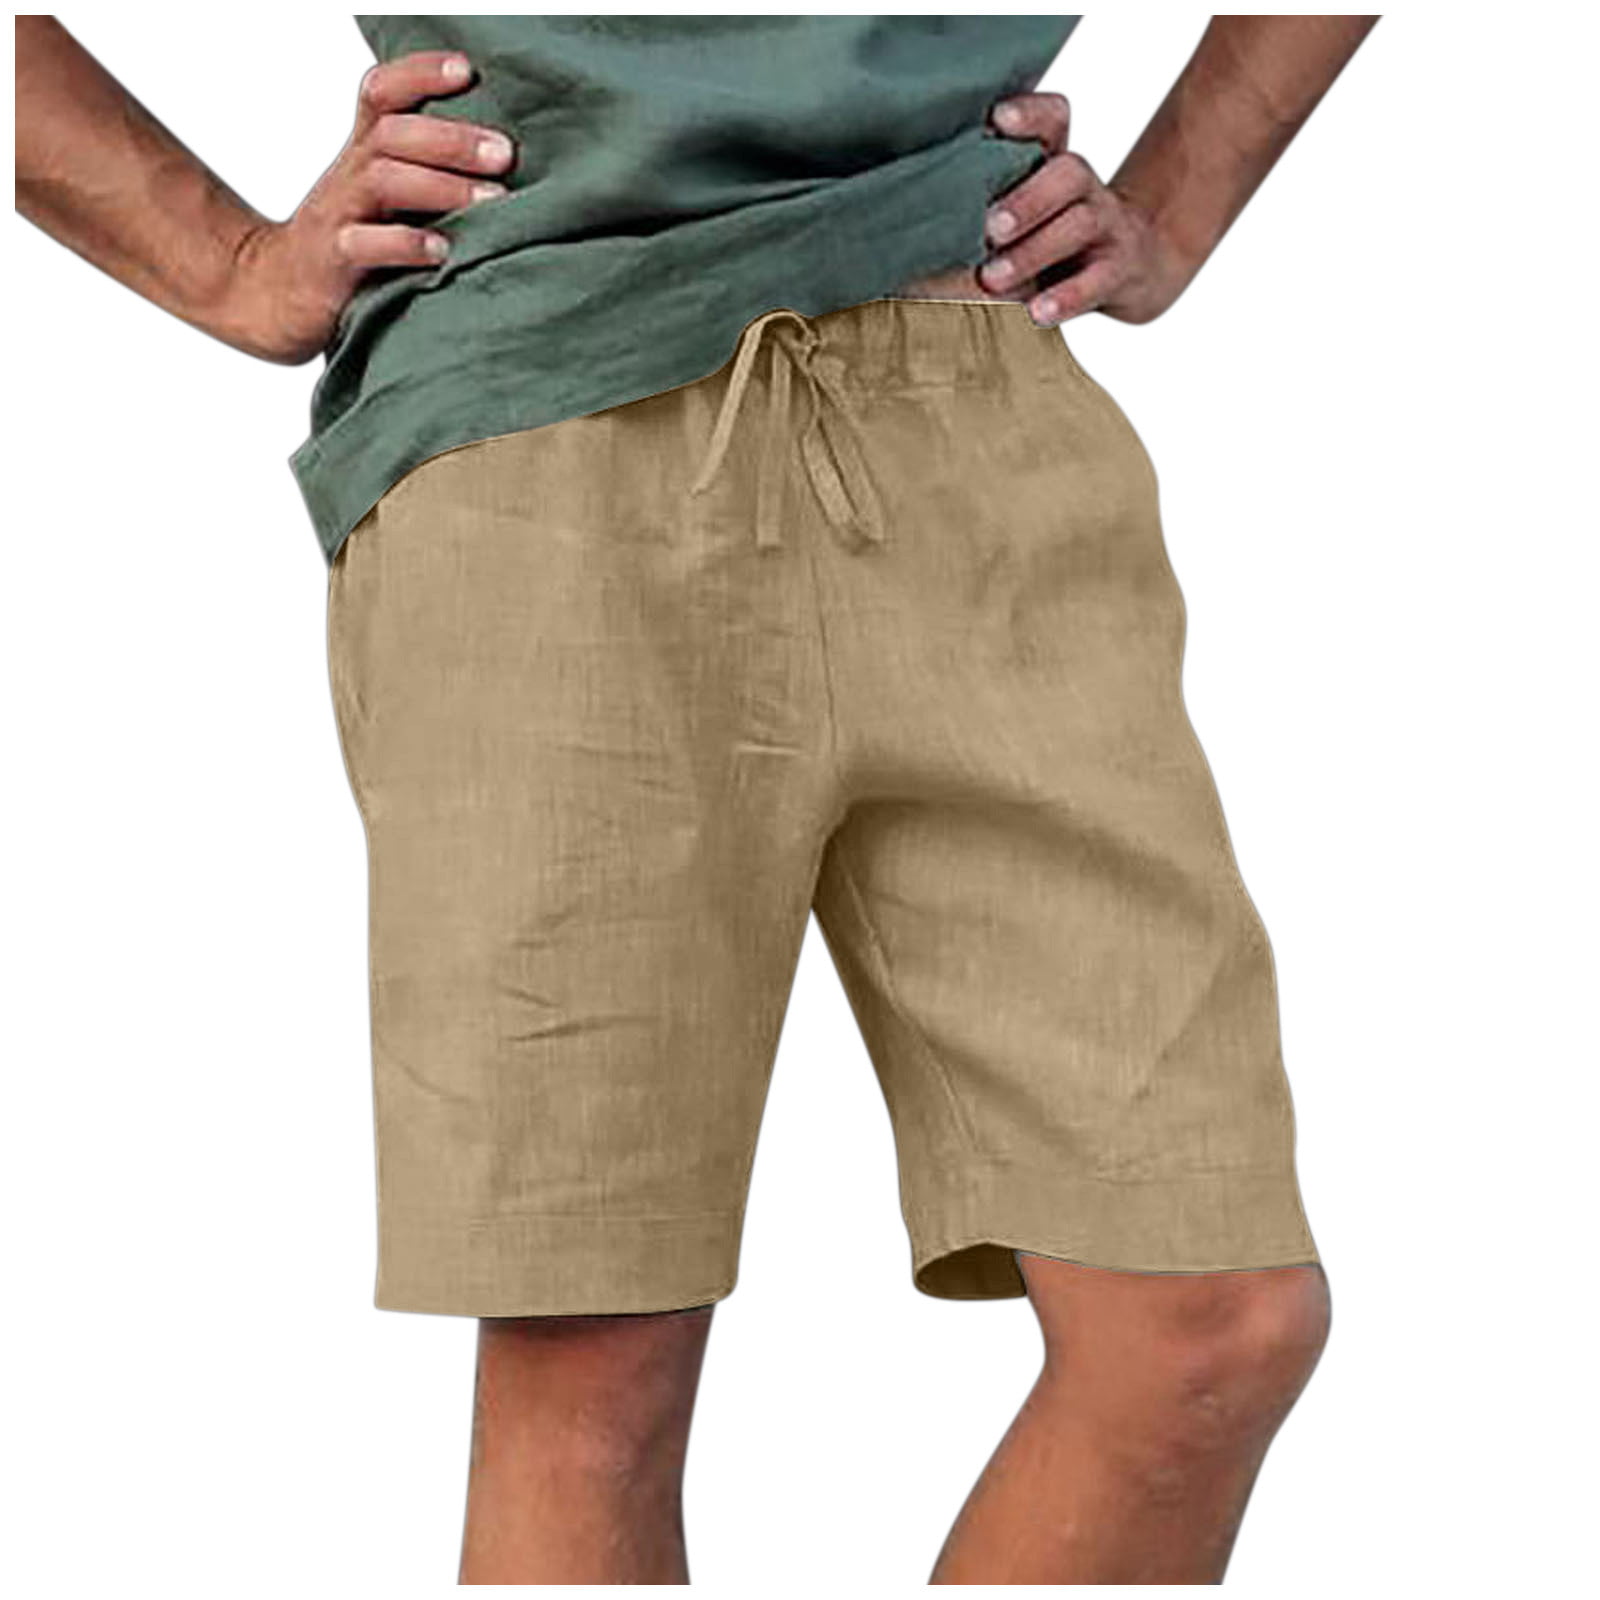 Men Casual Pure Color Outdoors Pocket Beach Work Trouser Cargo Shorts Pants